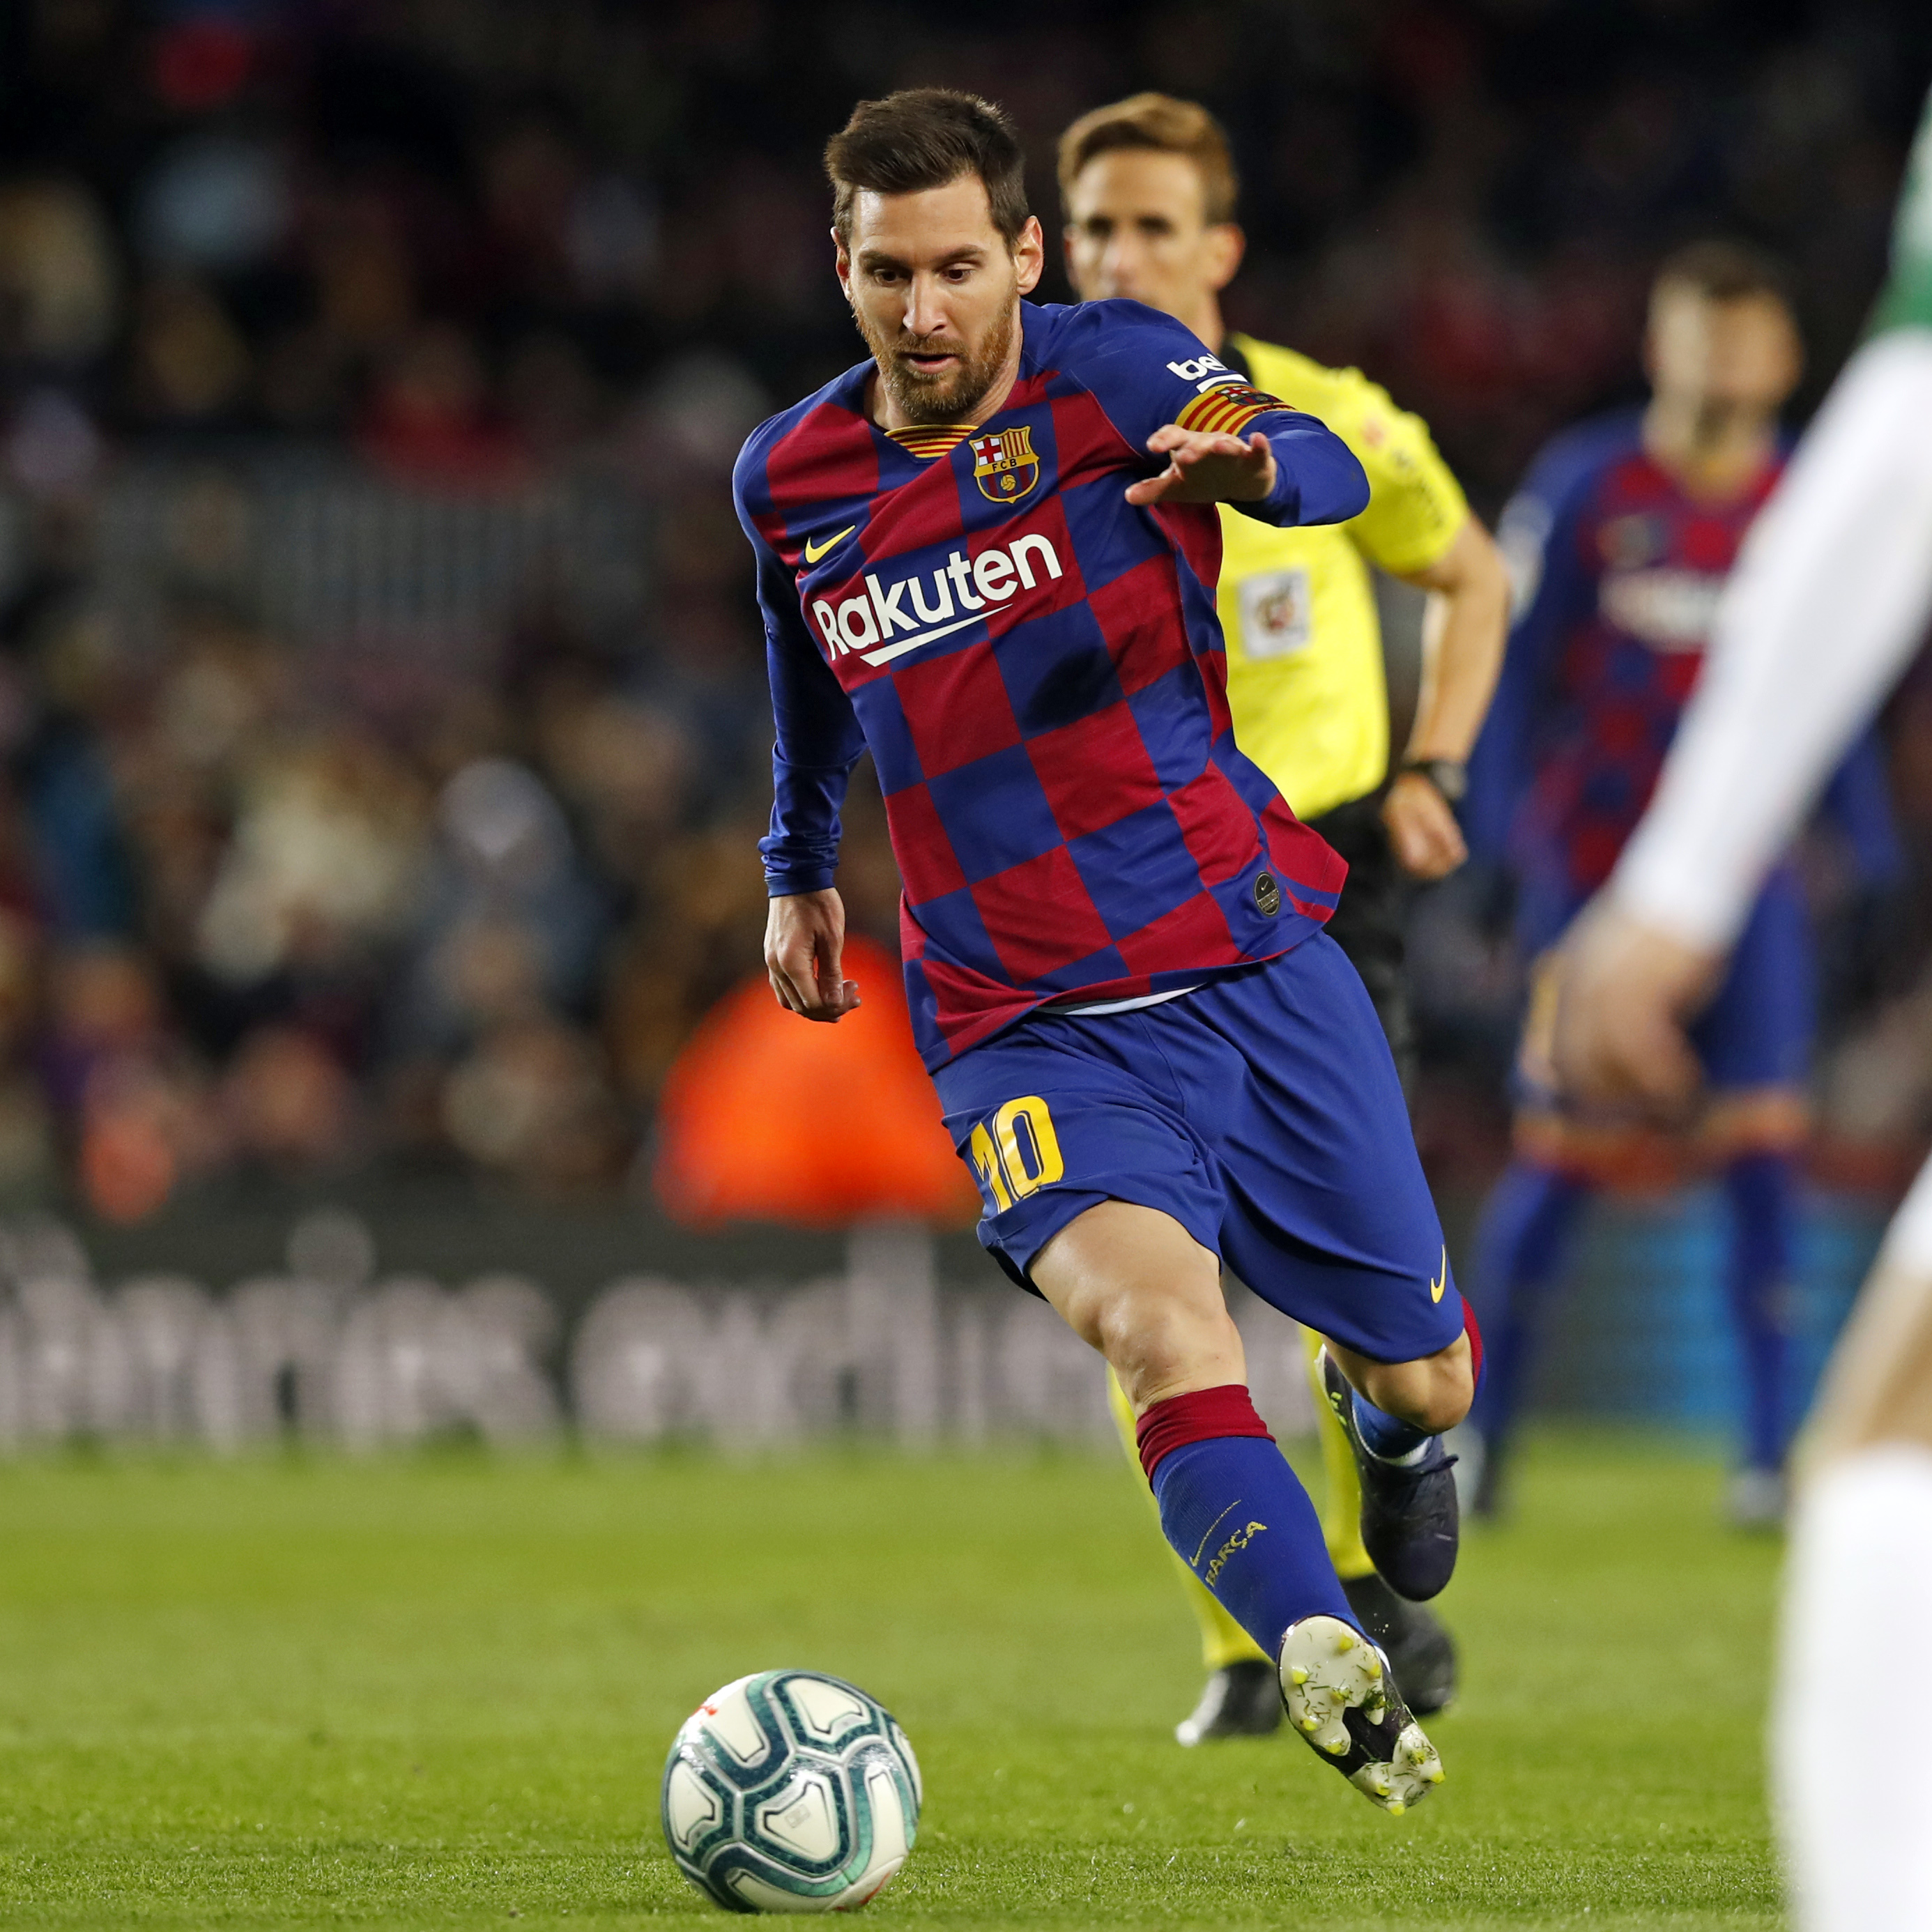 The Copa del Rey is a competition in which Leo Messi has enjoyed great succ...